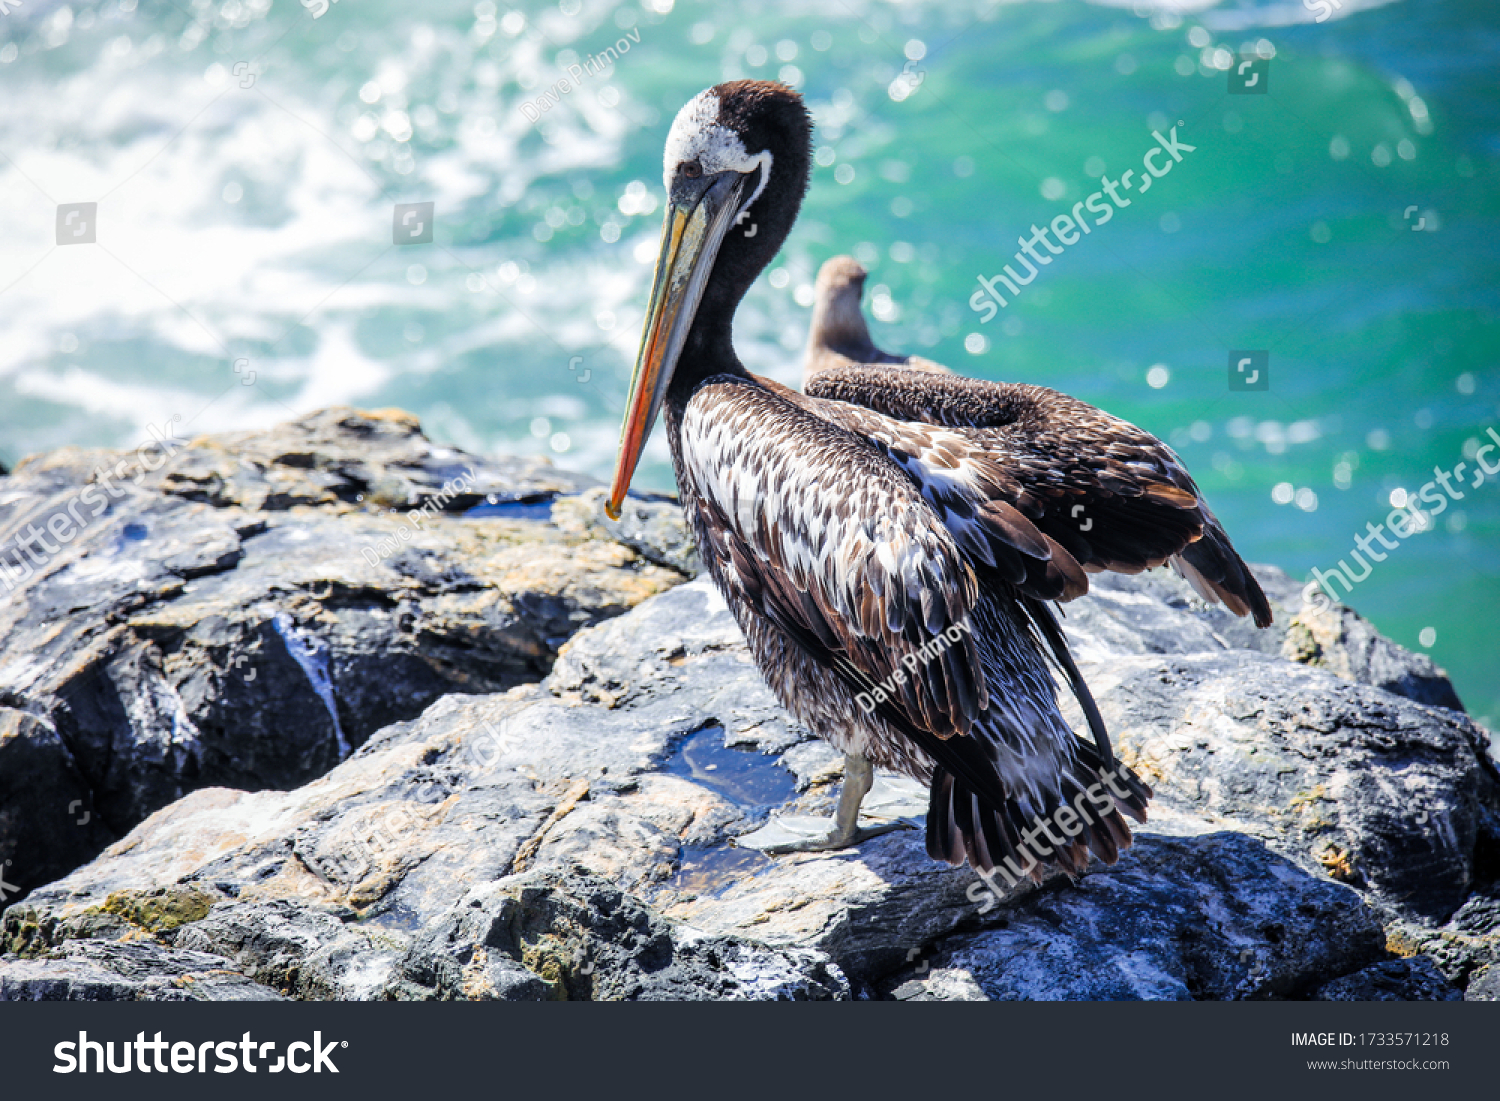 Big Brown Pelican Seating on the Stone near Vina Del Mar, Chile #1733571218